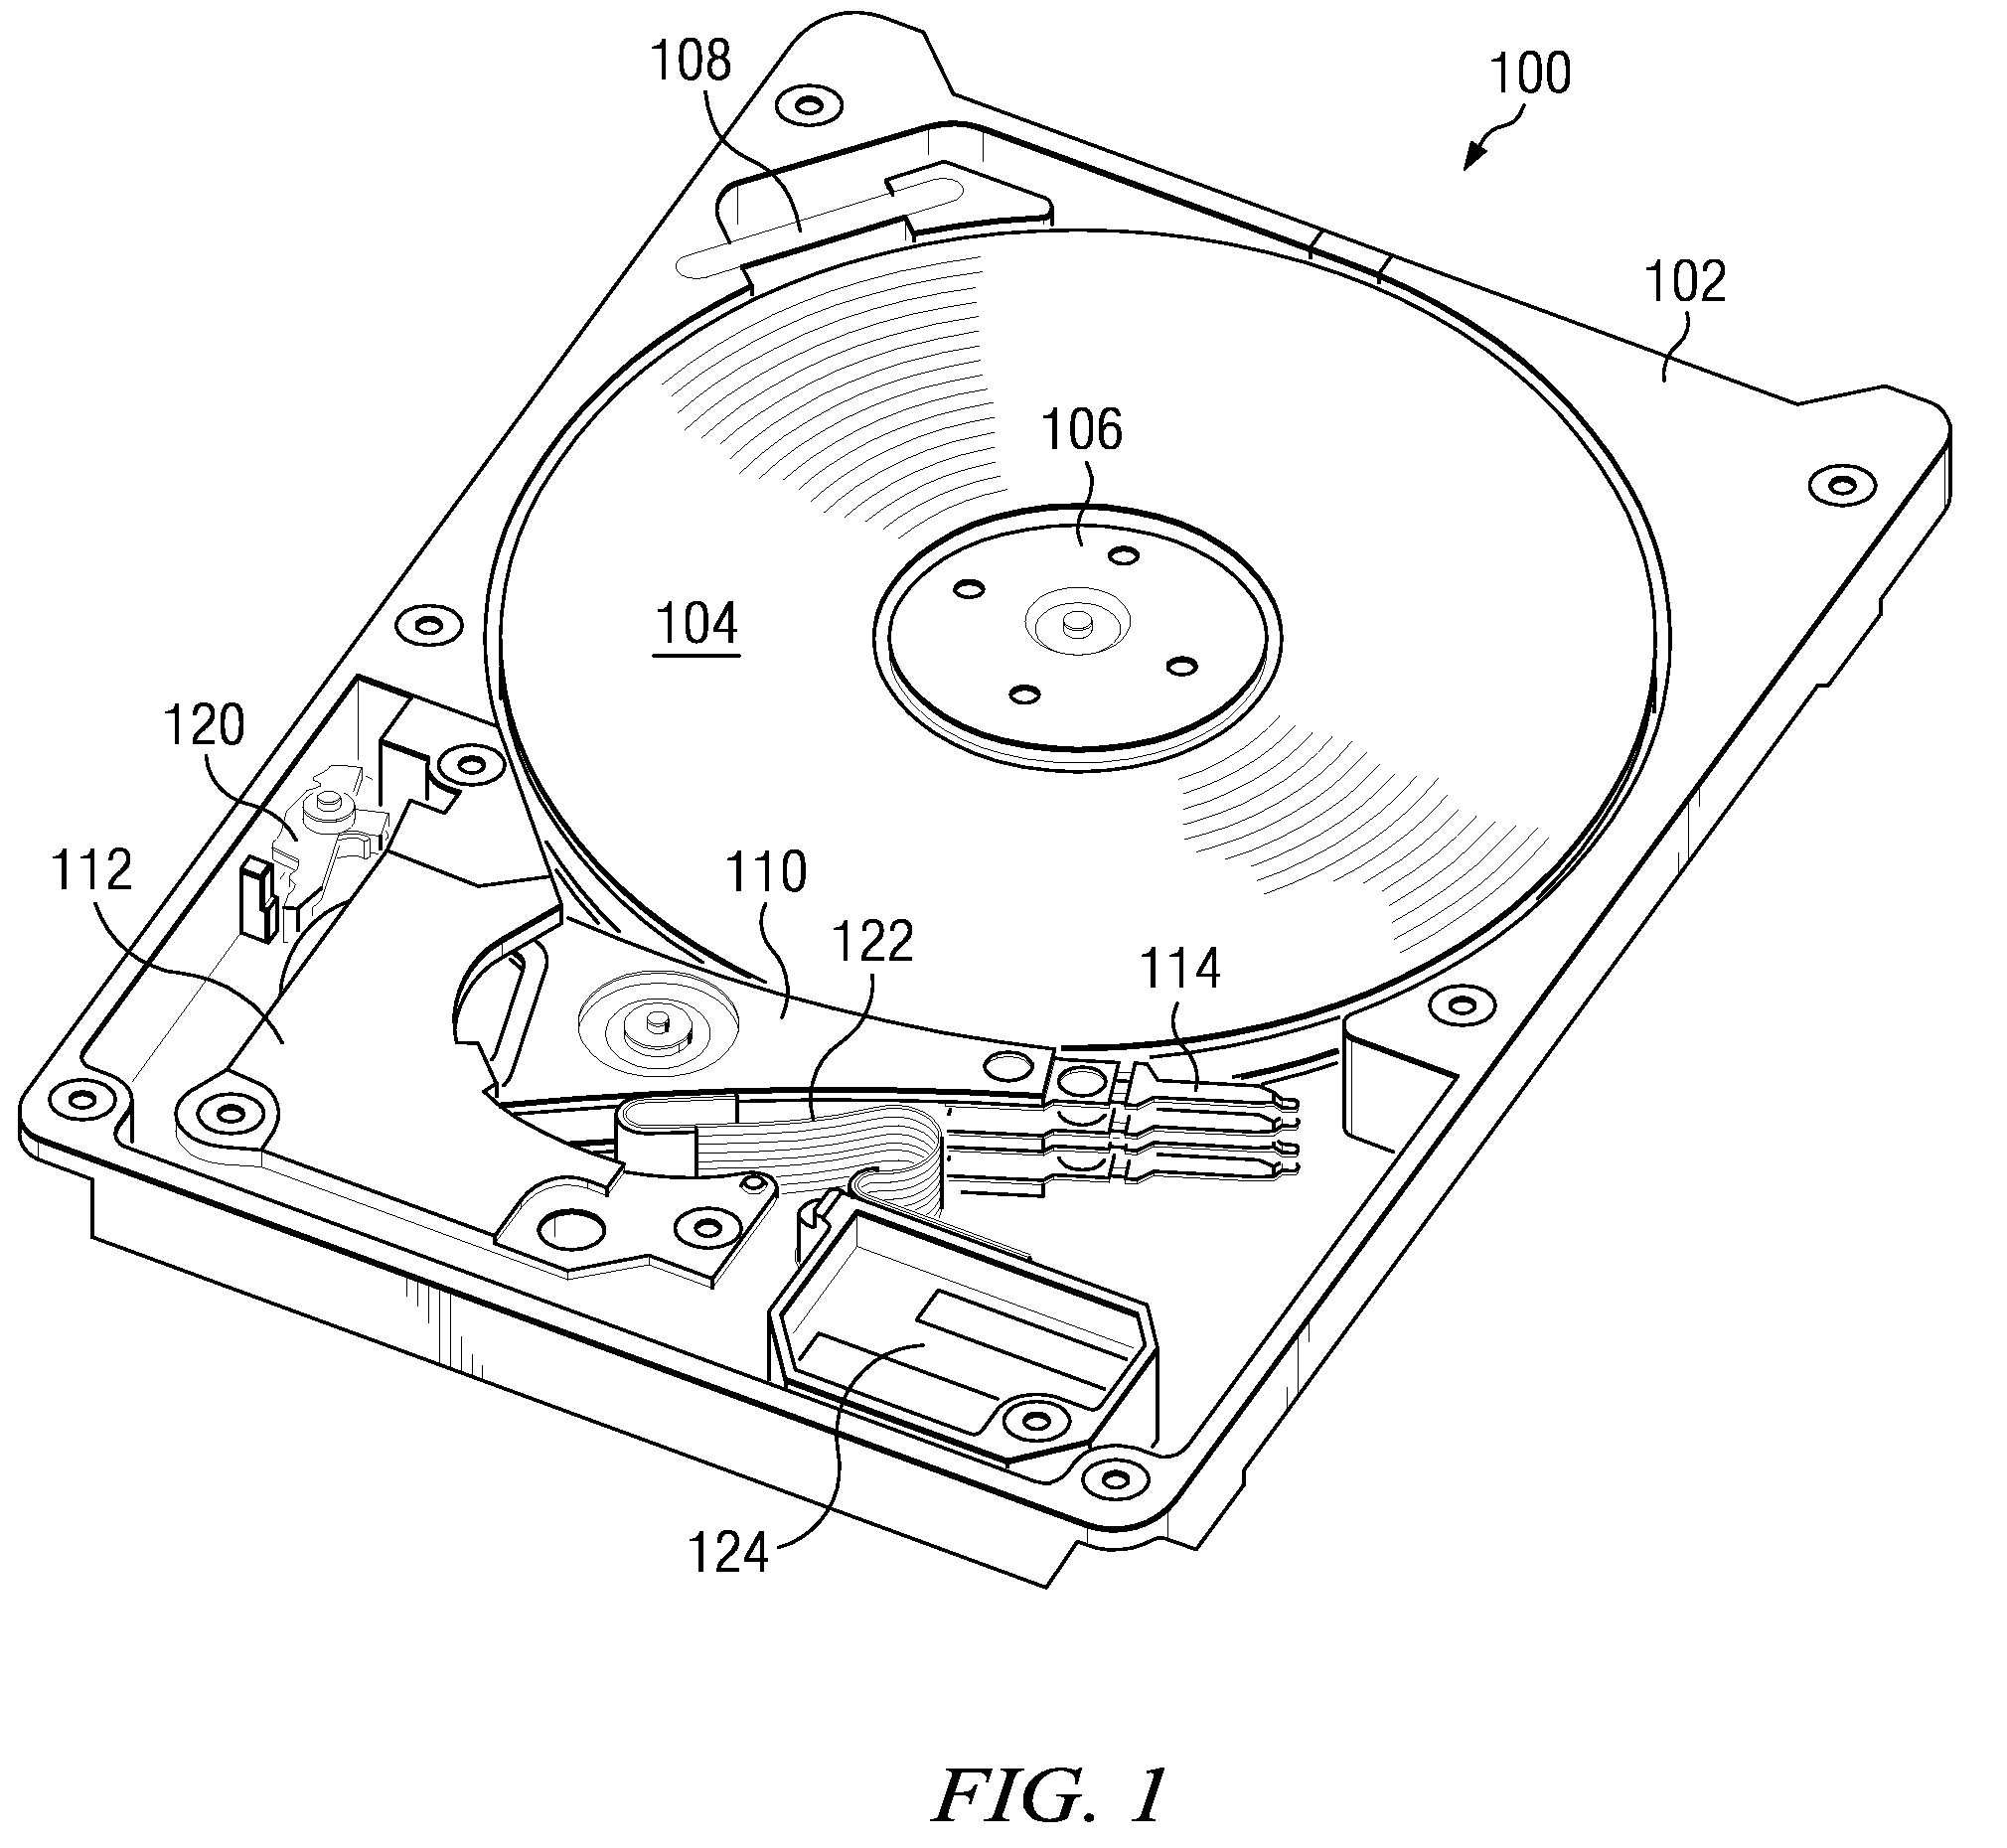 Head gimbal assembly having a load beam aperature over conductive heating pads that are offset from head bonding pads